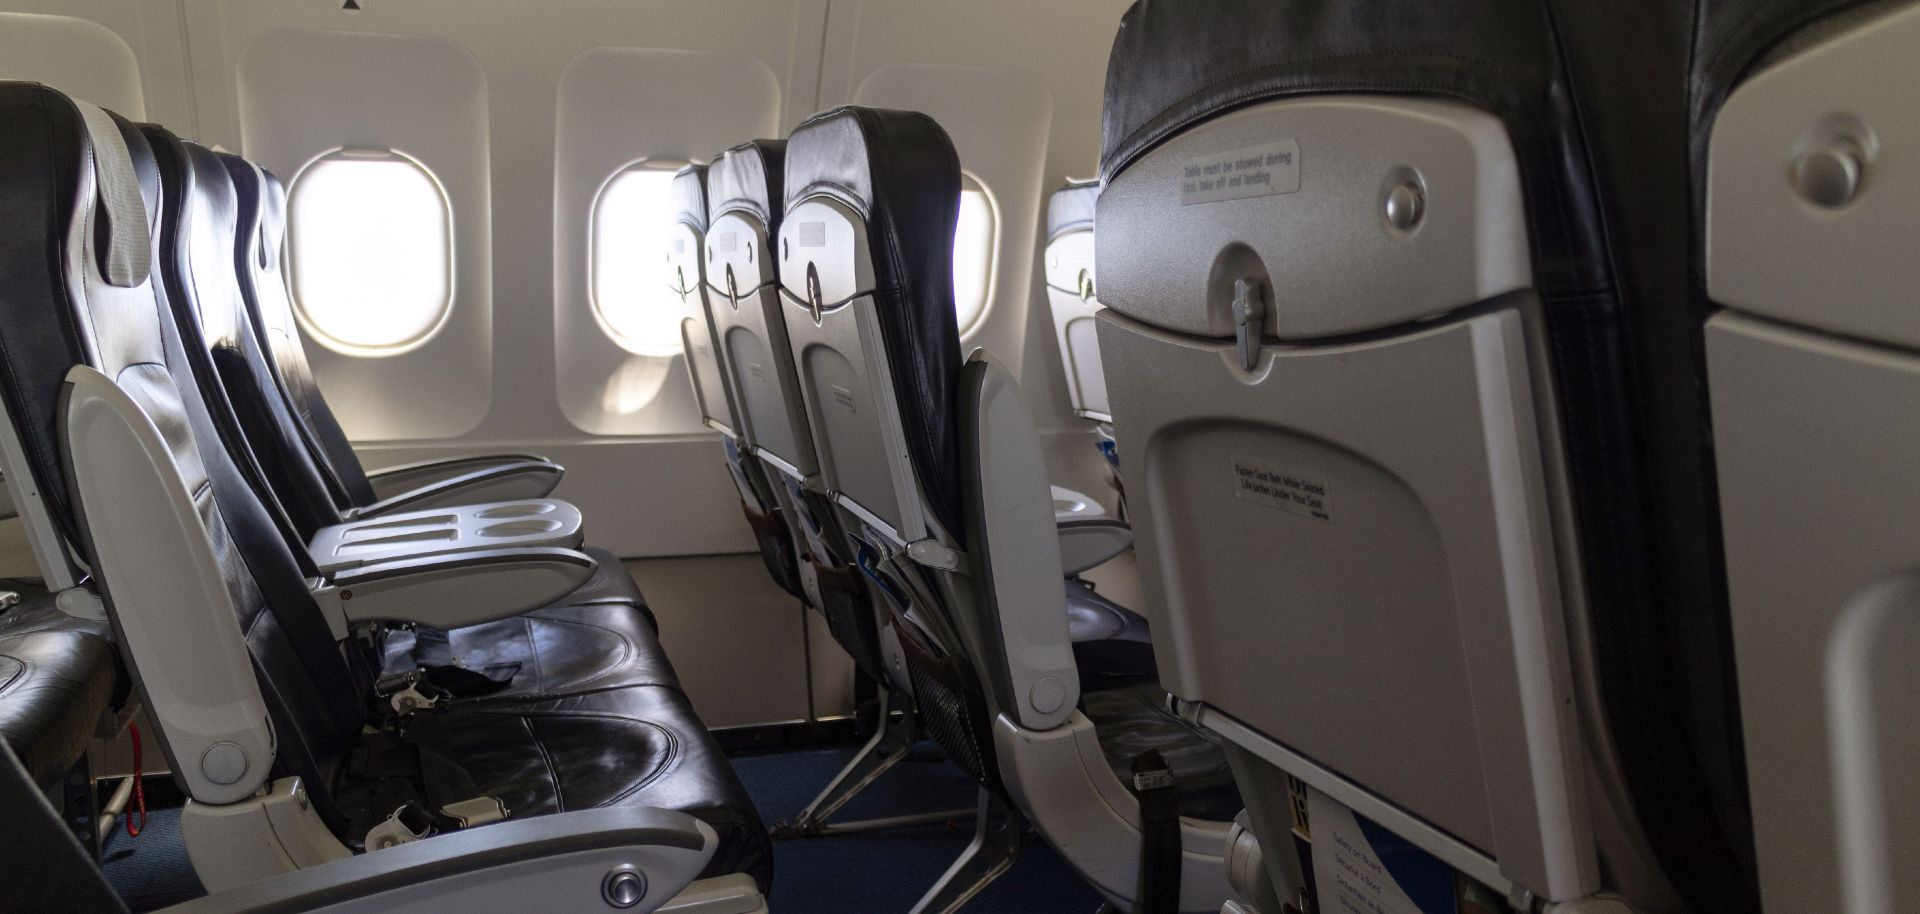 This photo shows a rows of seats on a passenger aircraft. 